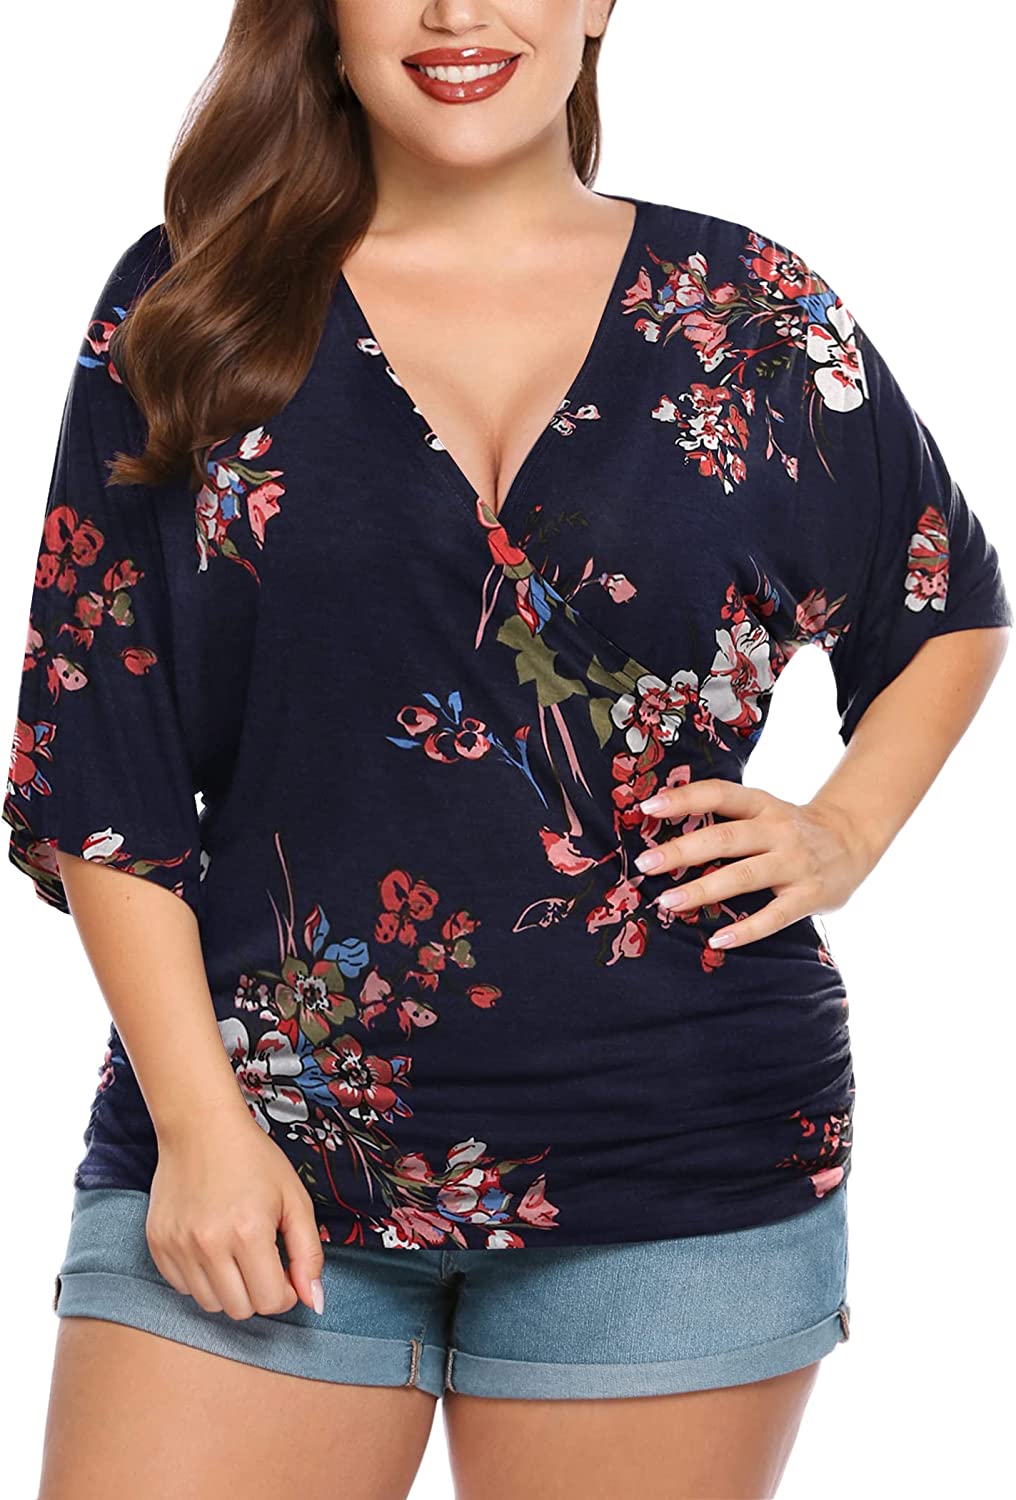 IN'VOLAND Womens Plus Size Tops V Neck Short Sleeve Shirts Loose